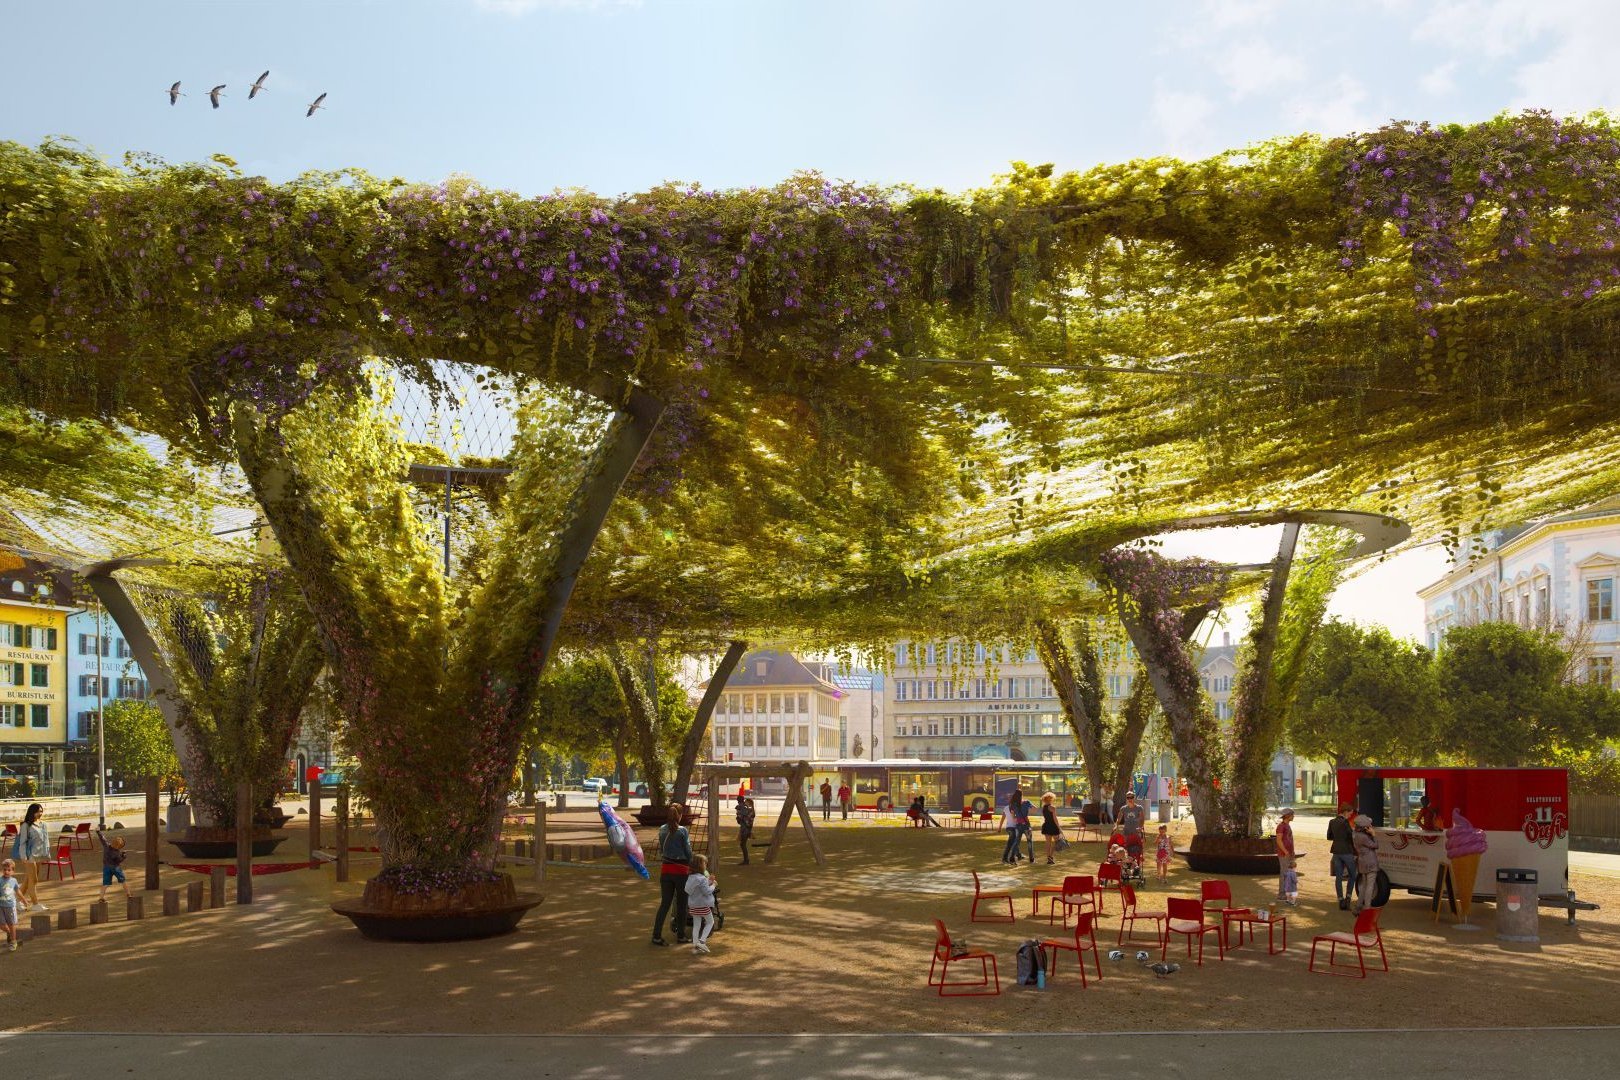 Visualisation of a possible greening on the Roter Platz in Solothurn